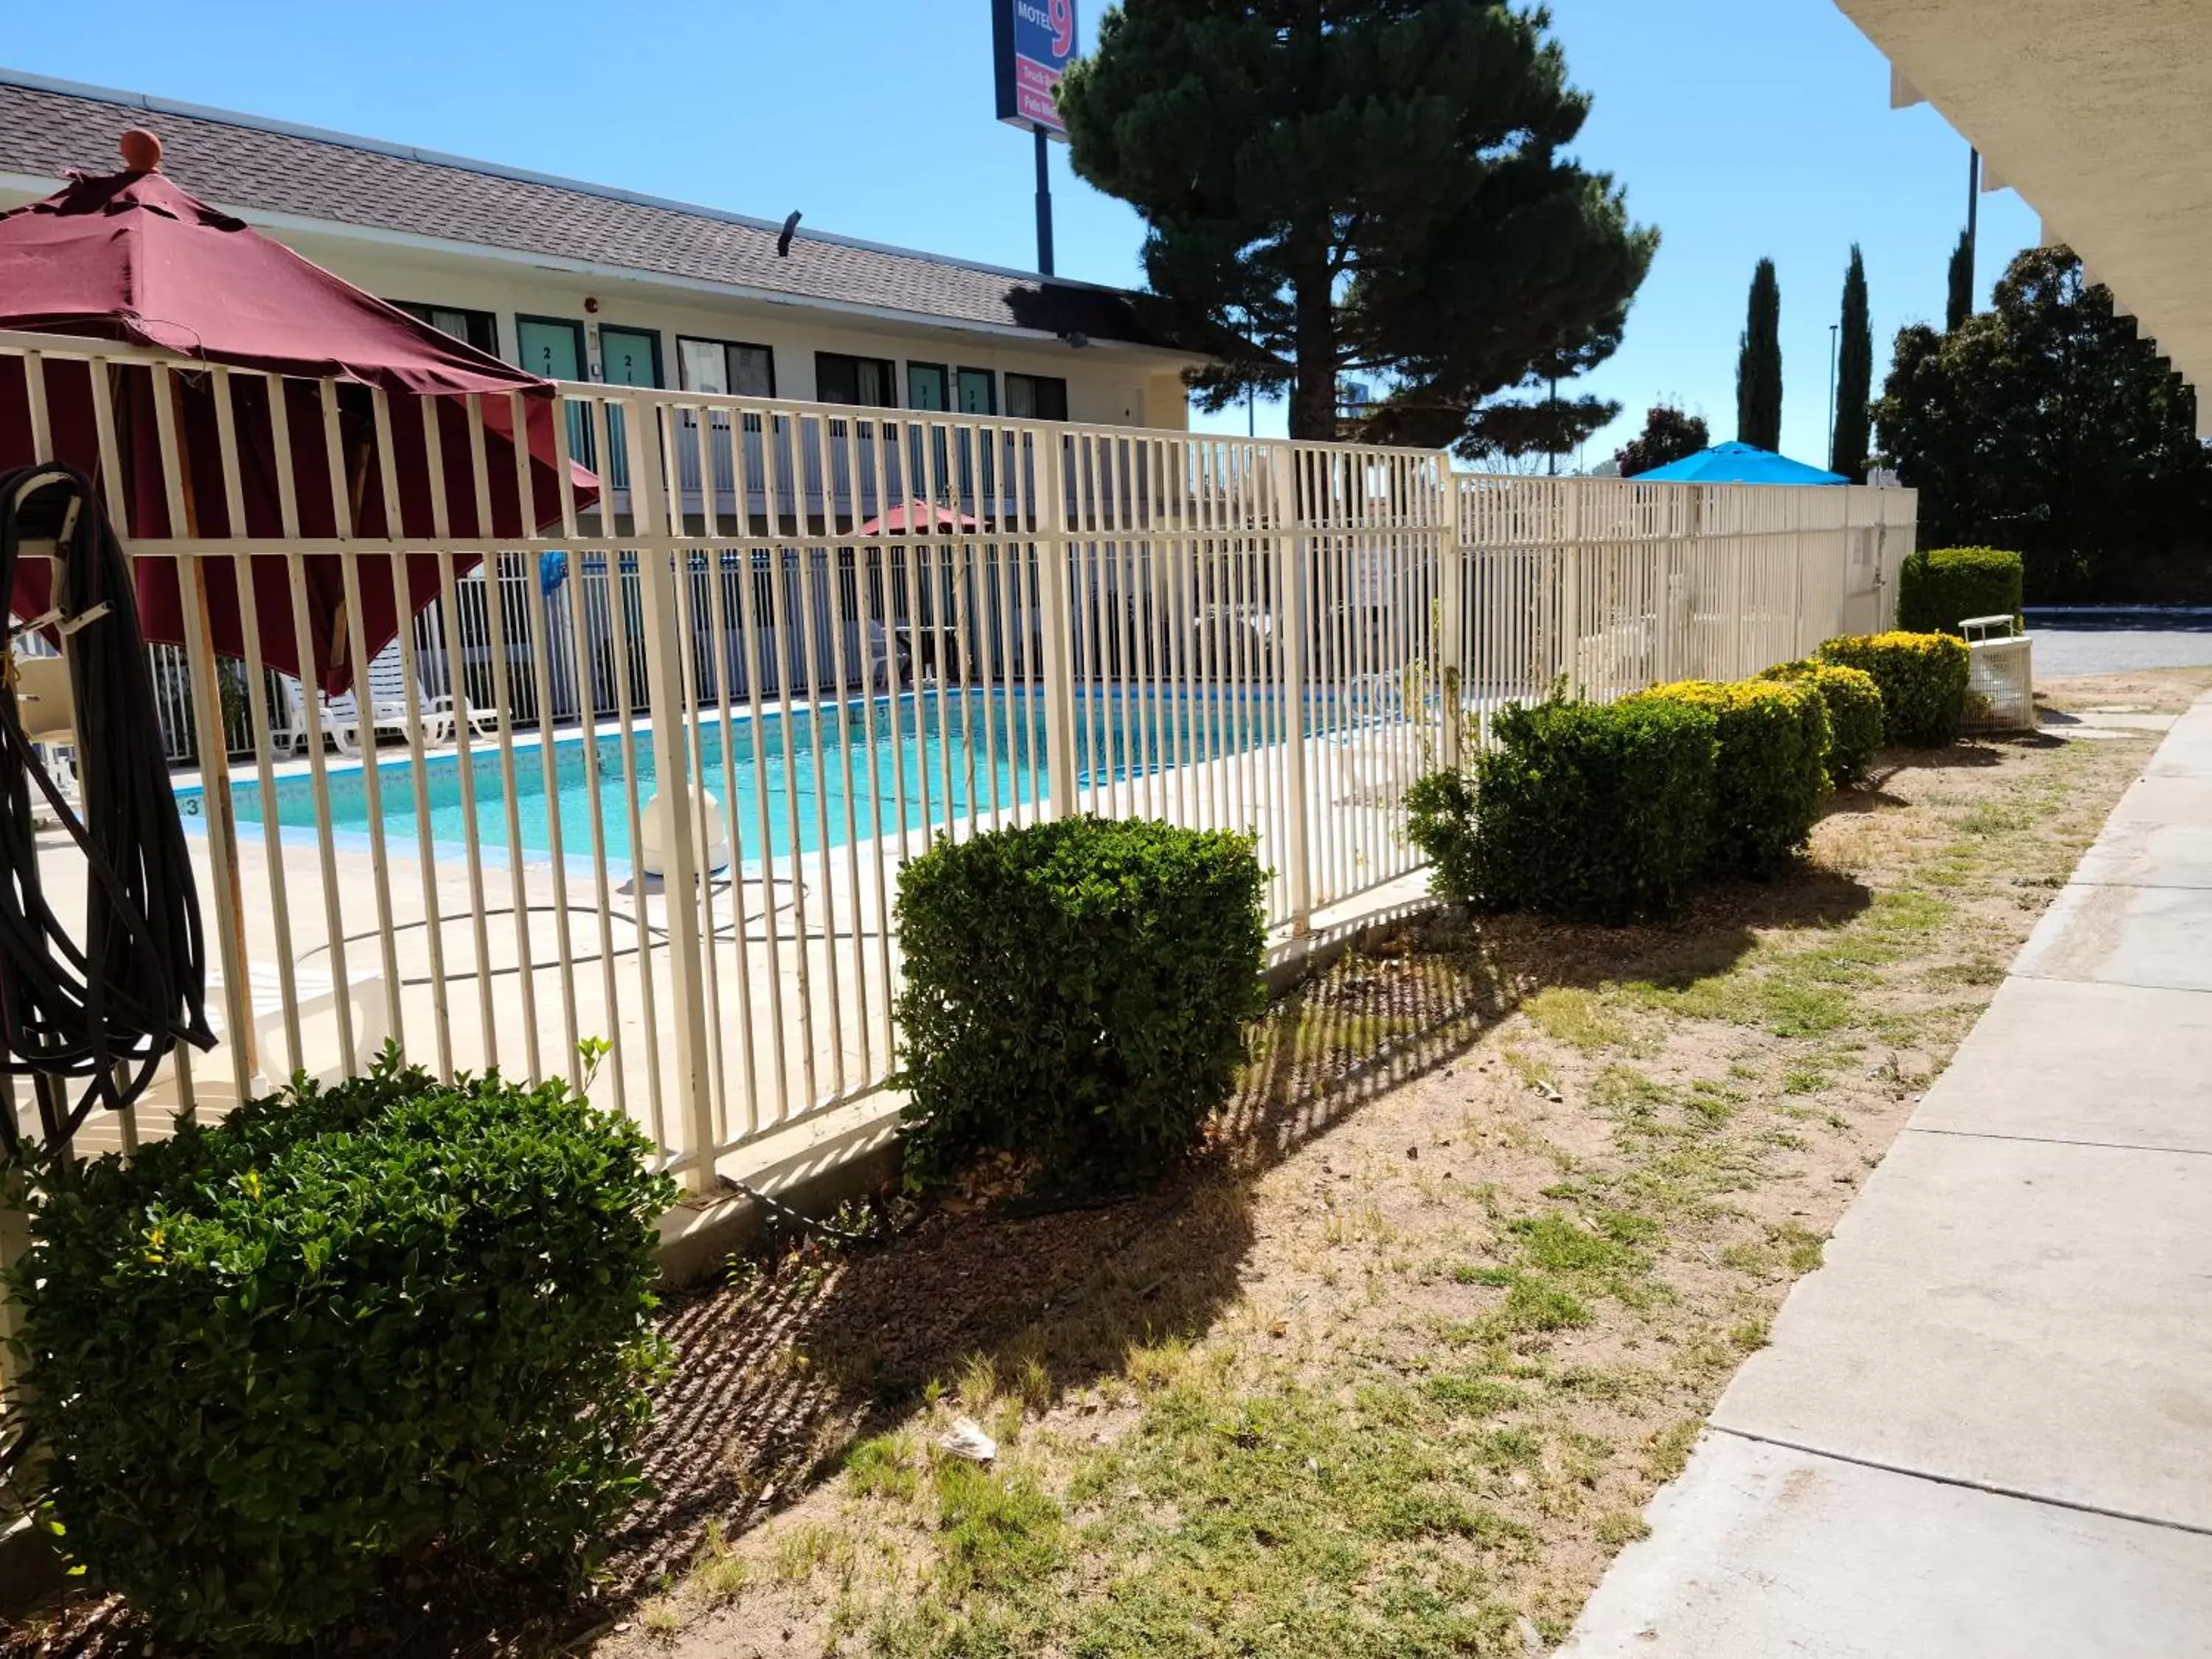 Property building, Swimming Pool in Motel 9 Las Cruces